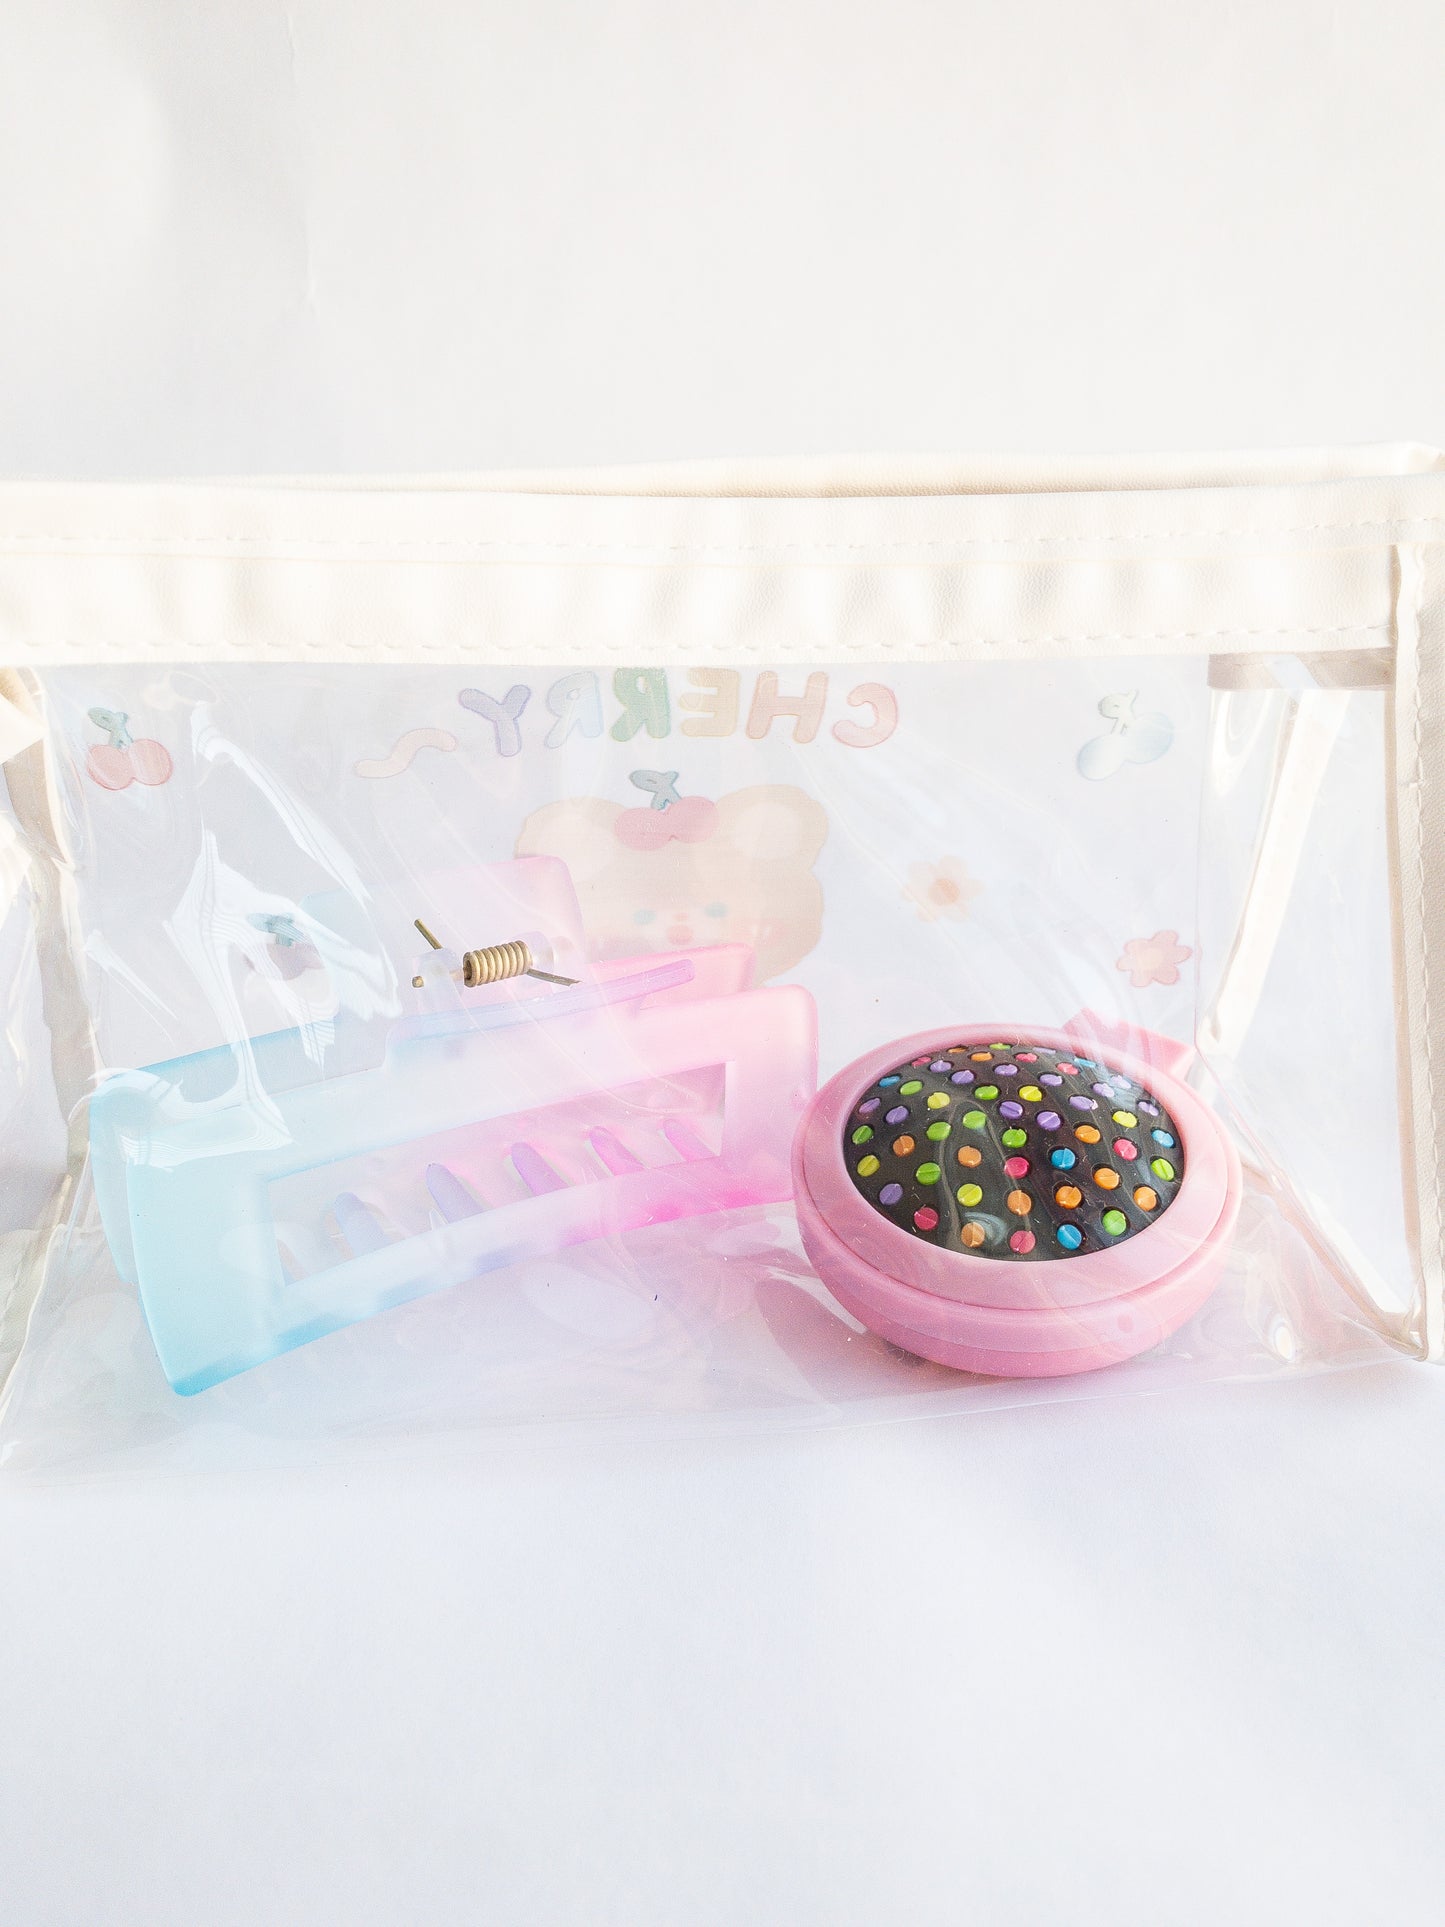 Have you wanted a storage pouch to take Eggy Cakes clips on the go? Here is the cutest little cherry bear pouch for just that! Use it to store your makeup, pencils, or hair clips. Clear pouch with an adorable bear, flower and cherries on one side.